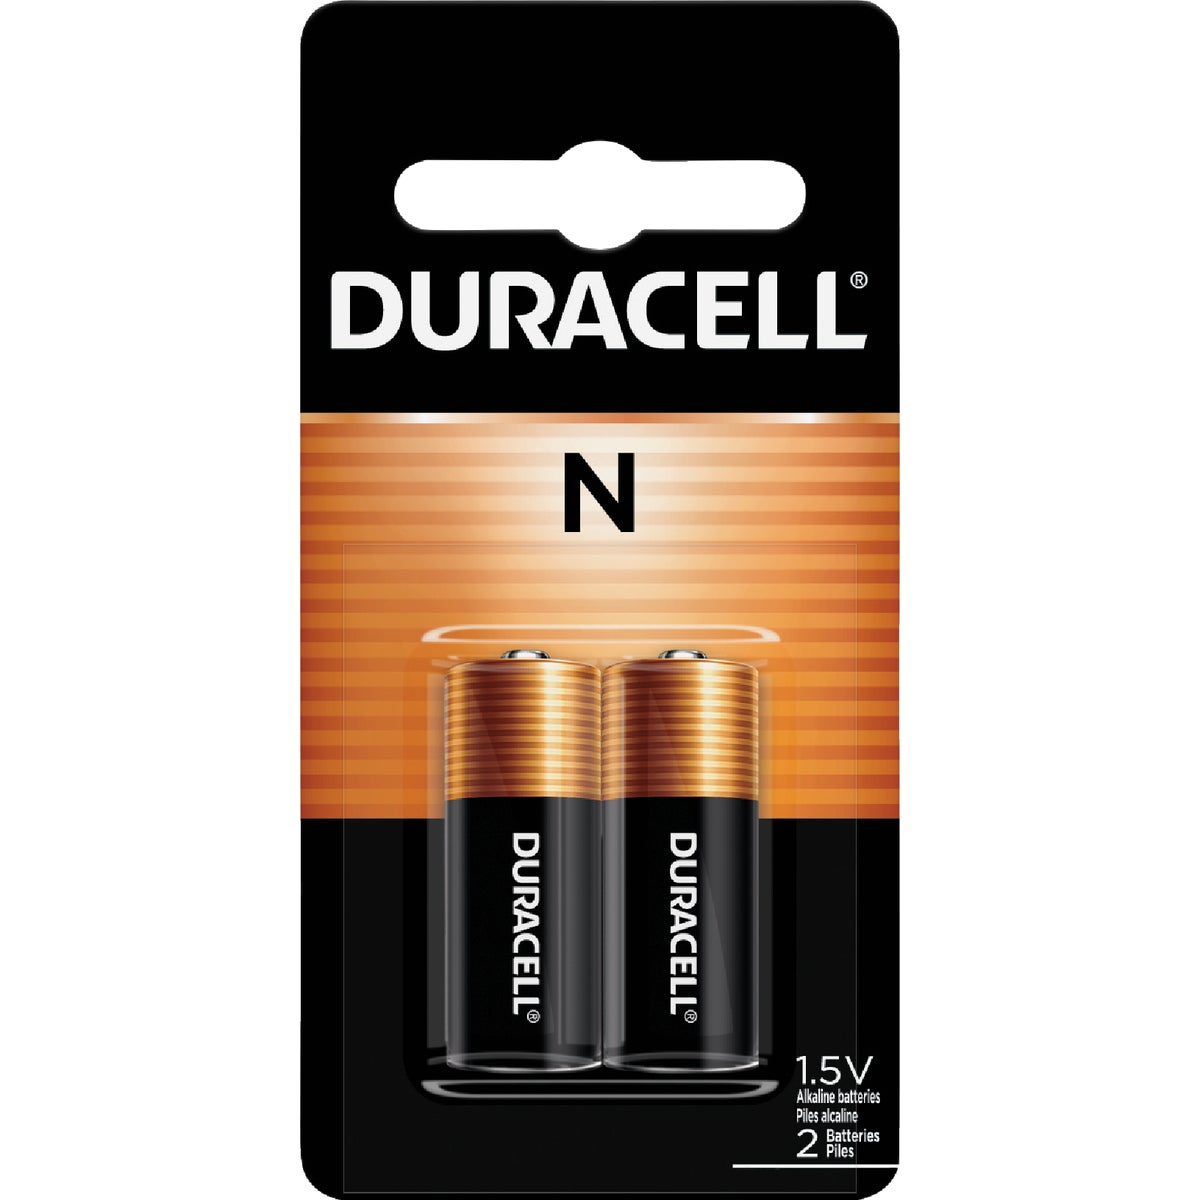 Item 830488, Alkaline battery N replaces Model No. LR1, E90, MN9100, and 910A.